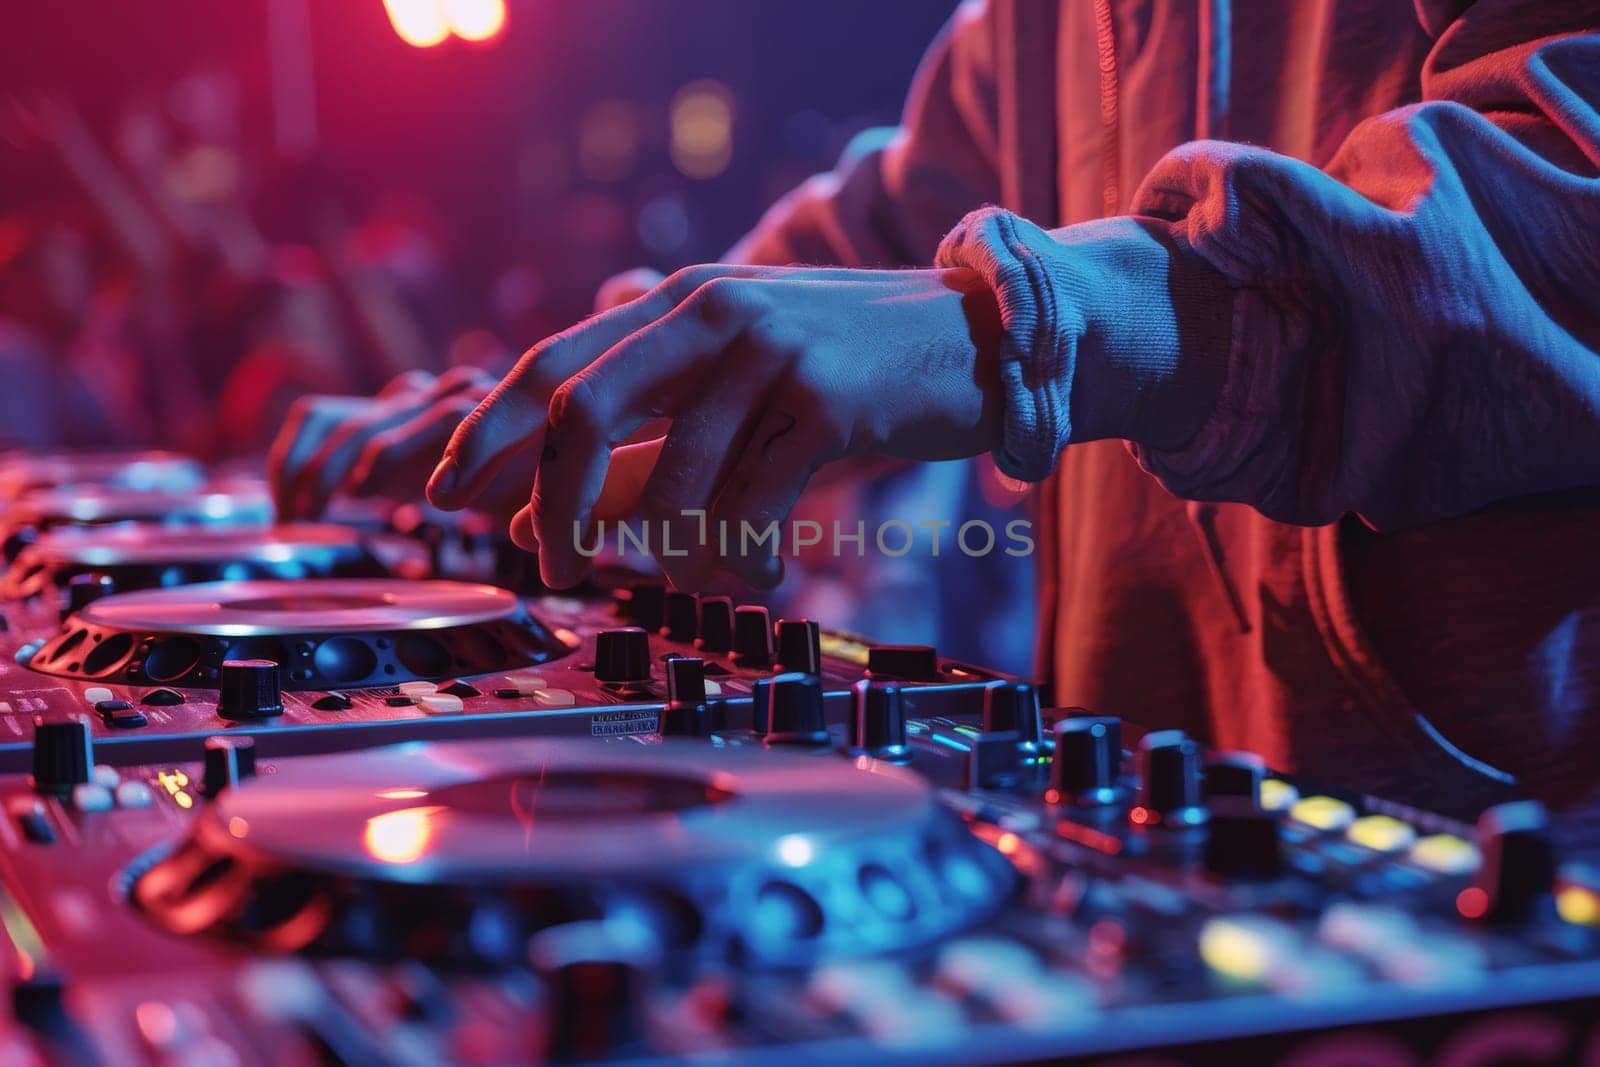 A DJ is playing music at a club. The lights are dim and the atmosphere is lively. The DJ is using a mixer to blend different tracks together